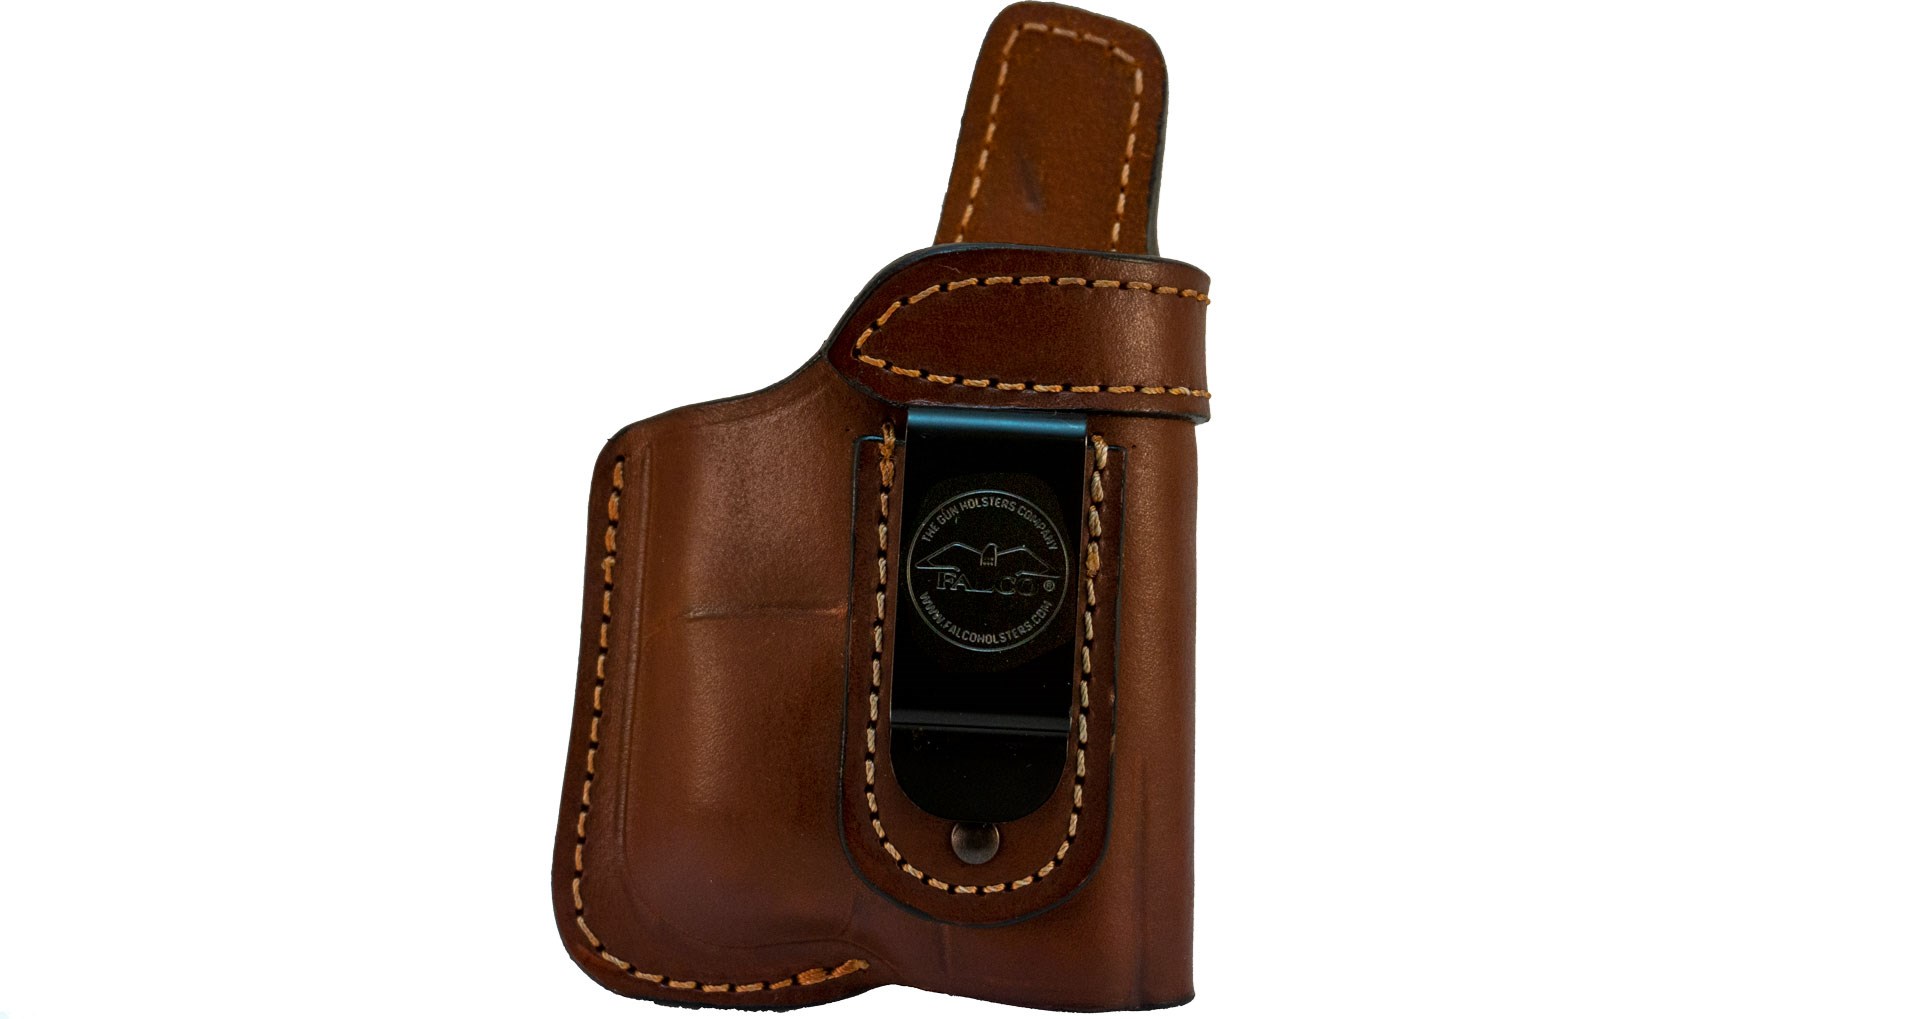 Holster front